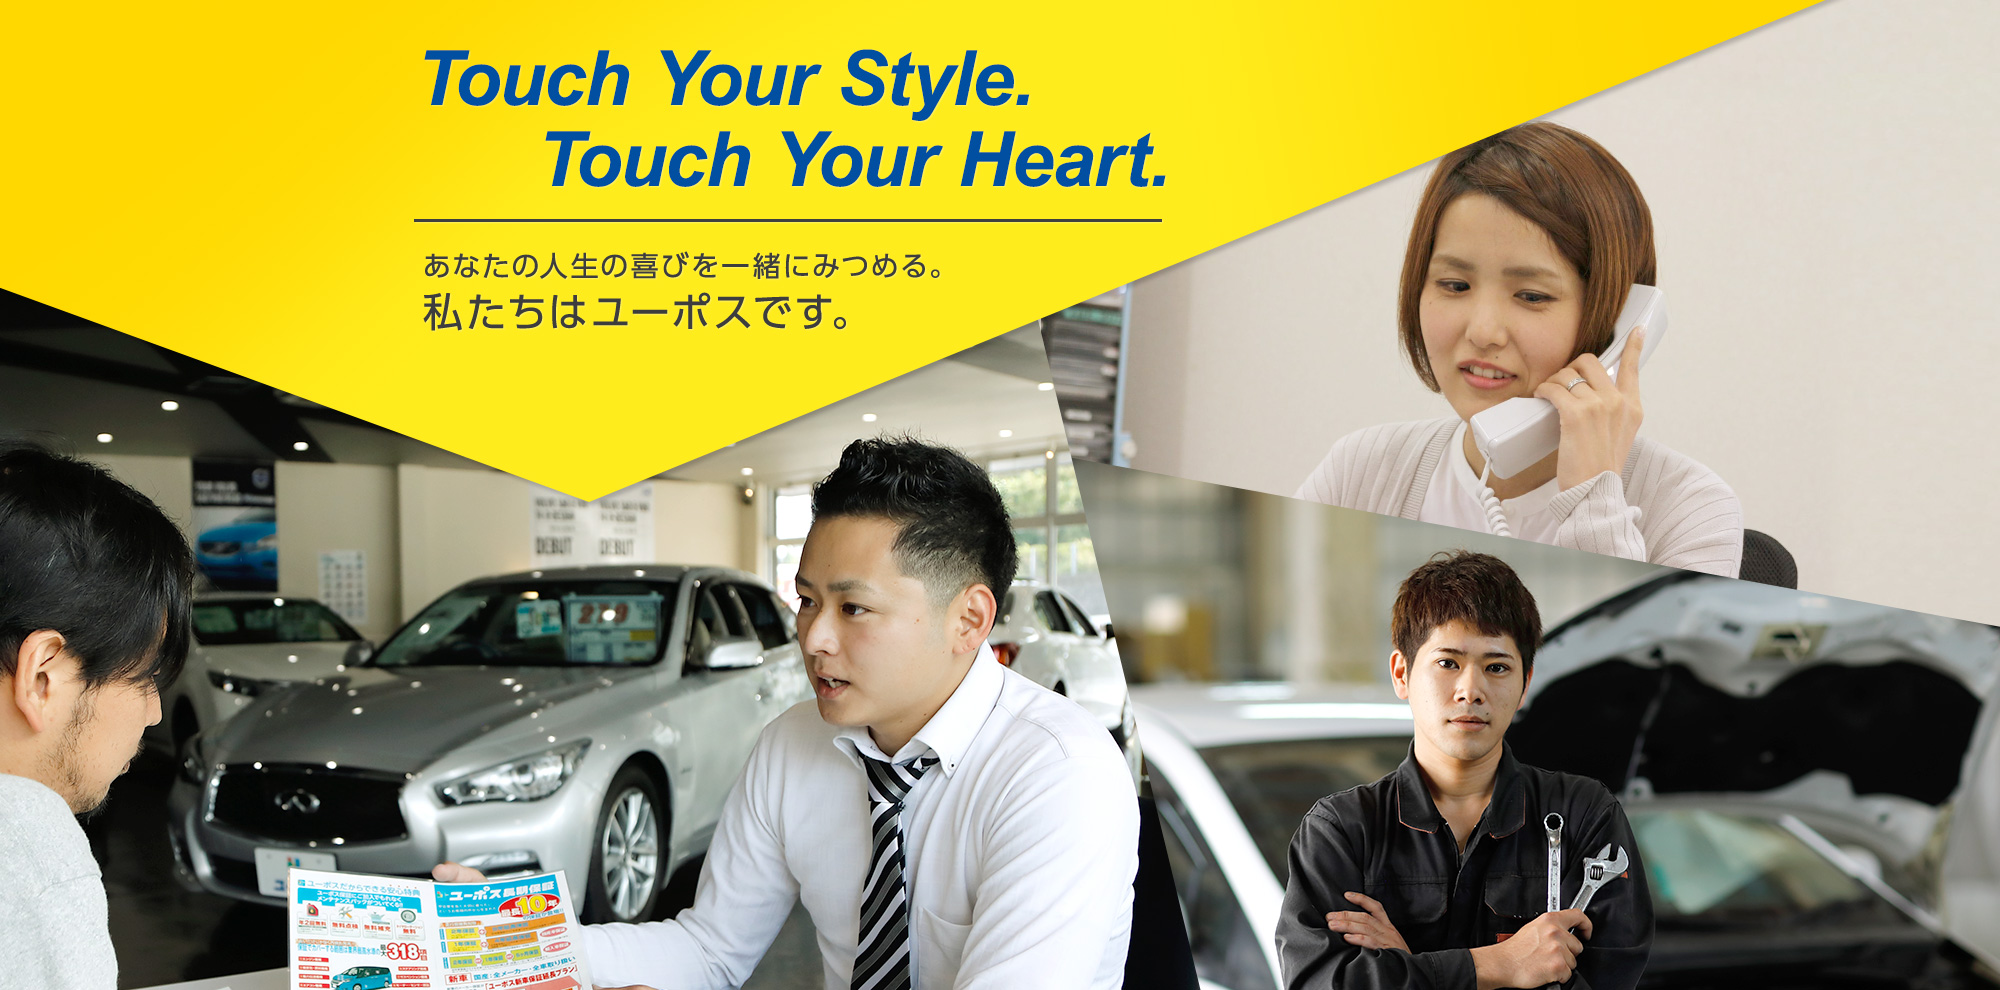 Touch Your Style. Touch Your Heart. あなたの人生の喜びを一緒にみつめる。私たちはユーポスです。